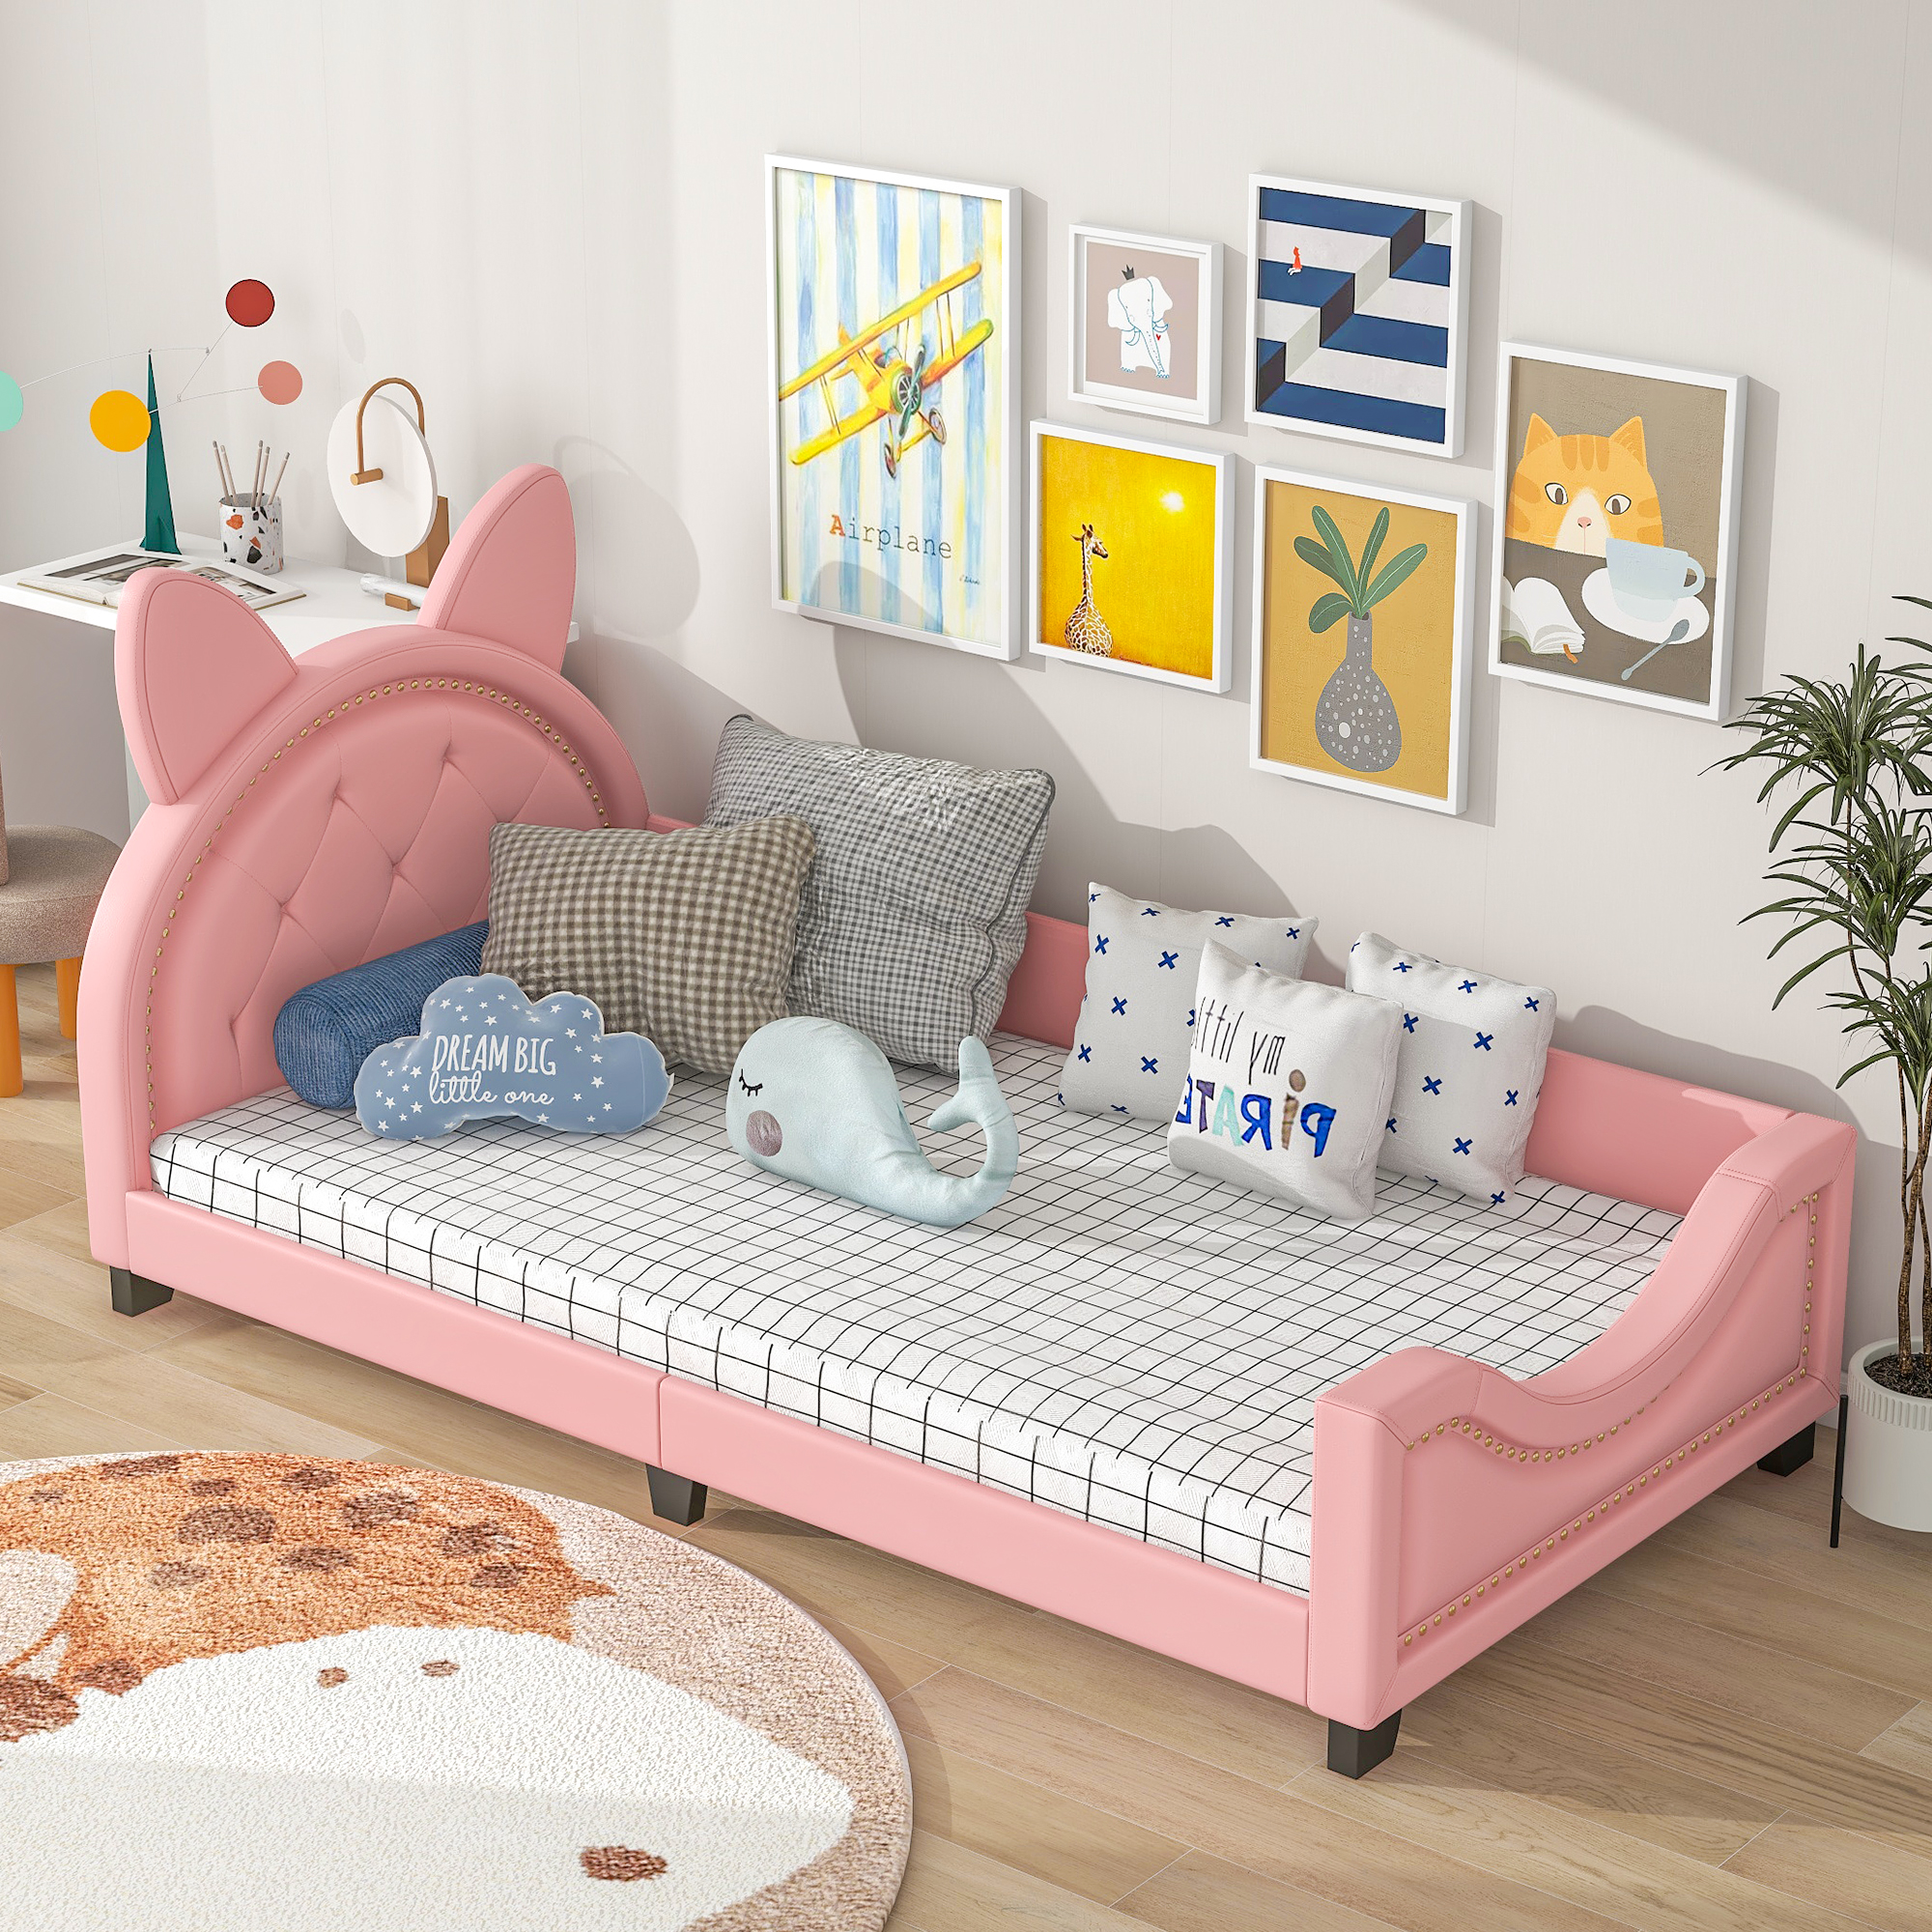 Bunny Shaped Twin Size Upholstery Daybed with Headboard for Kids, Pink - image 2 of 8